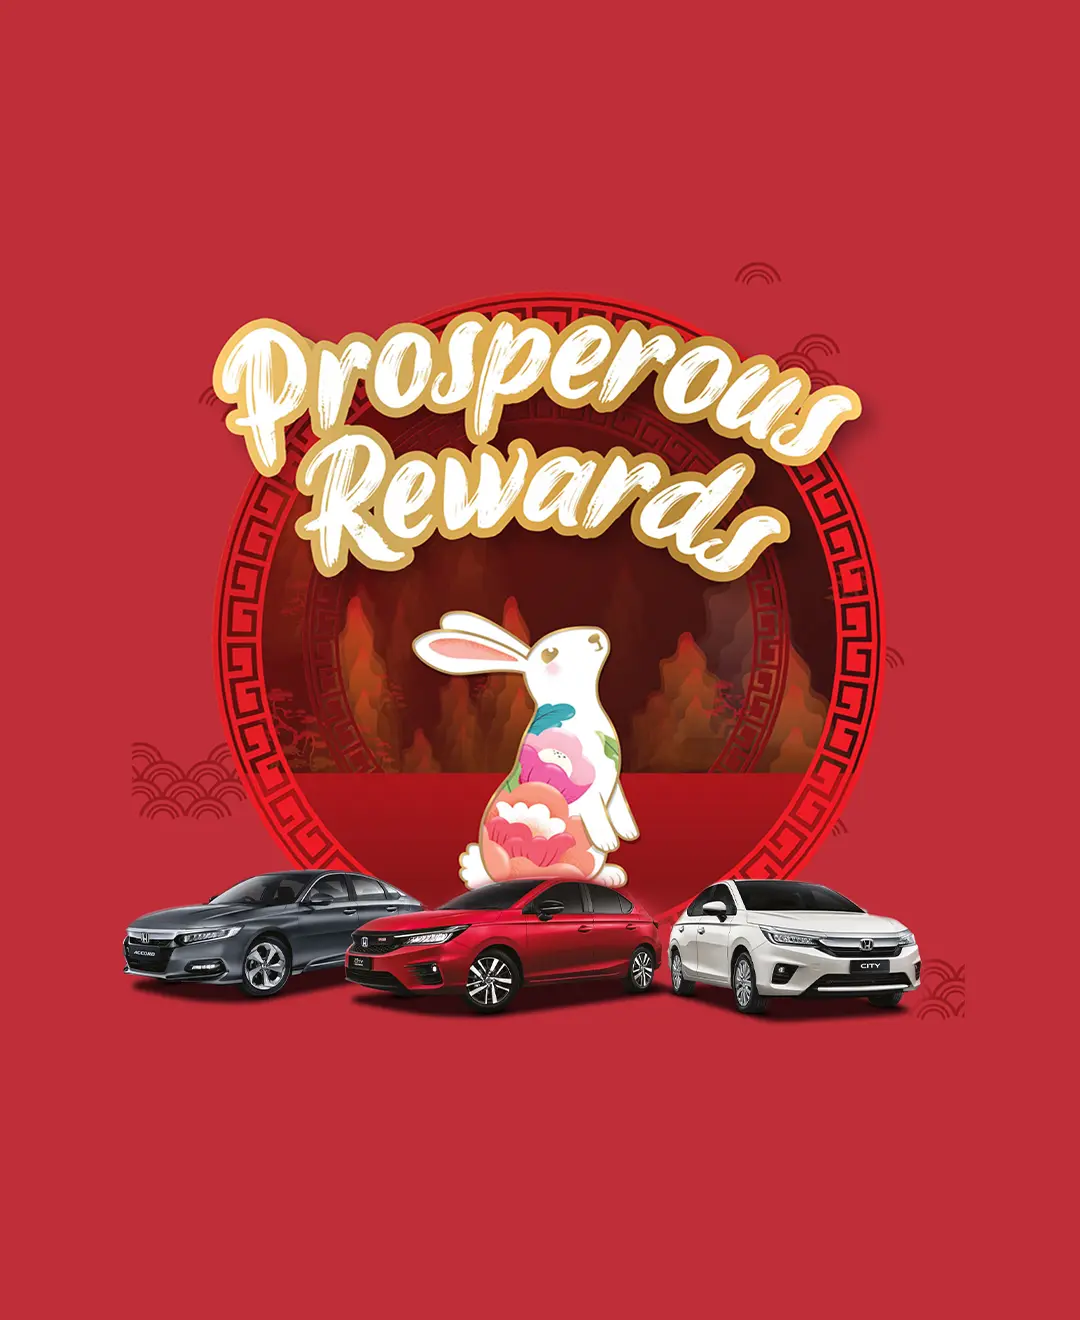 Prosper in the New Year with Honda